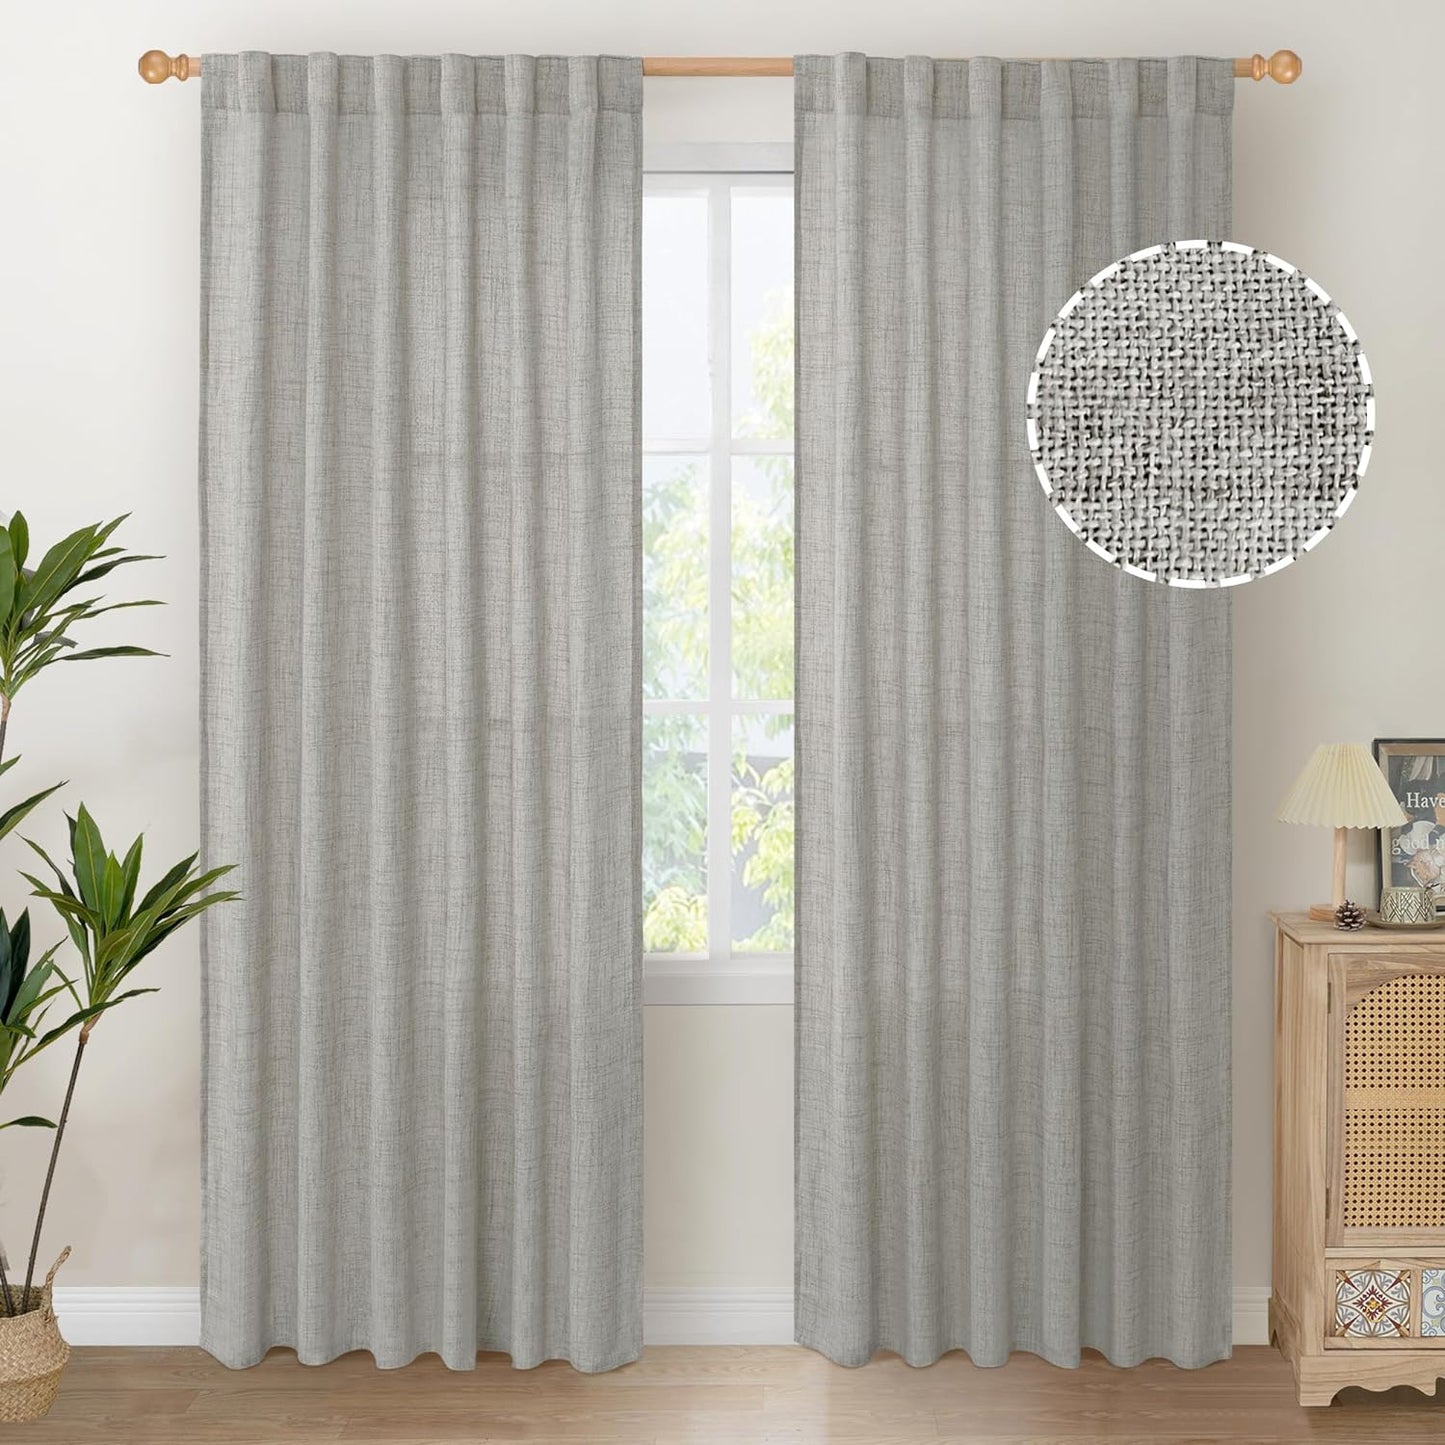 Youngstex Natural Linen Curtains 72 Inch Length 2 Panels for Living Room Light Filtering Textured Window Drapes for Bedroom Dining Office Back Tab Rod Pocket, 52 X 72 Inch  YoungsTex Dark Grey 52W X 84L 